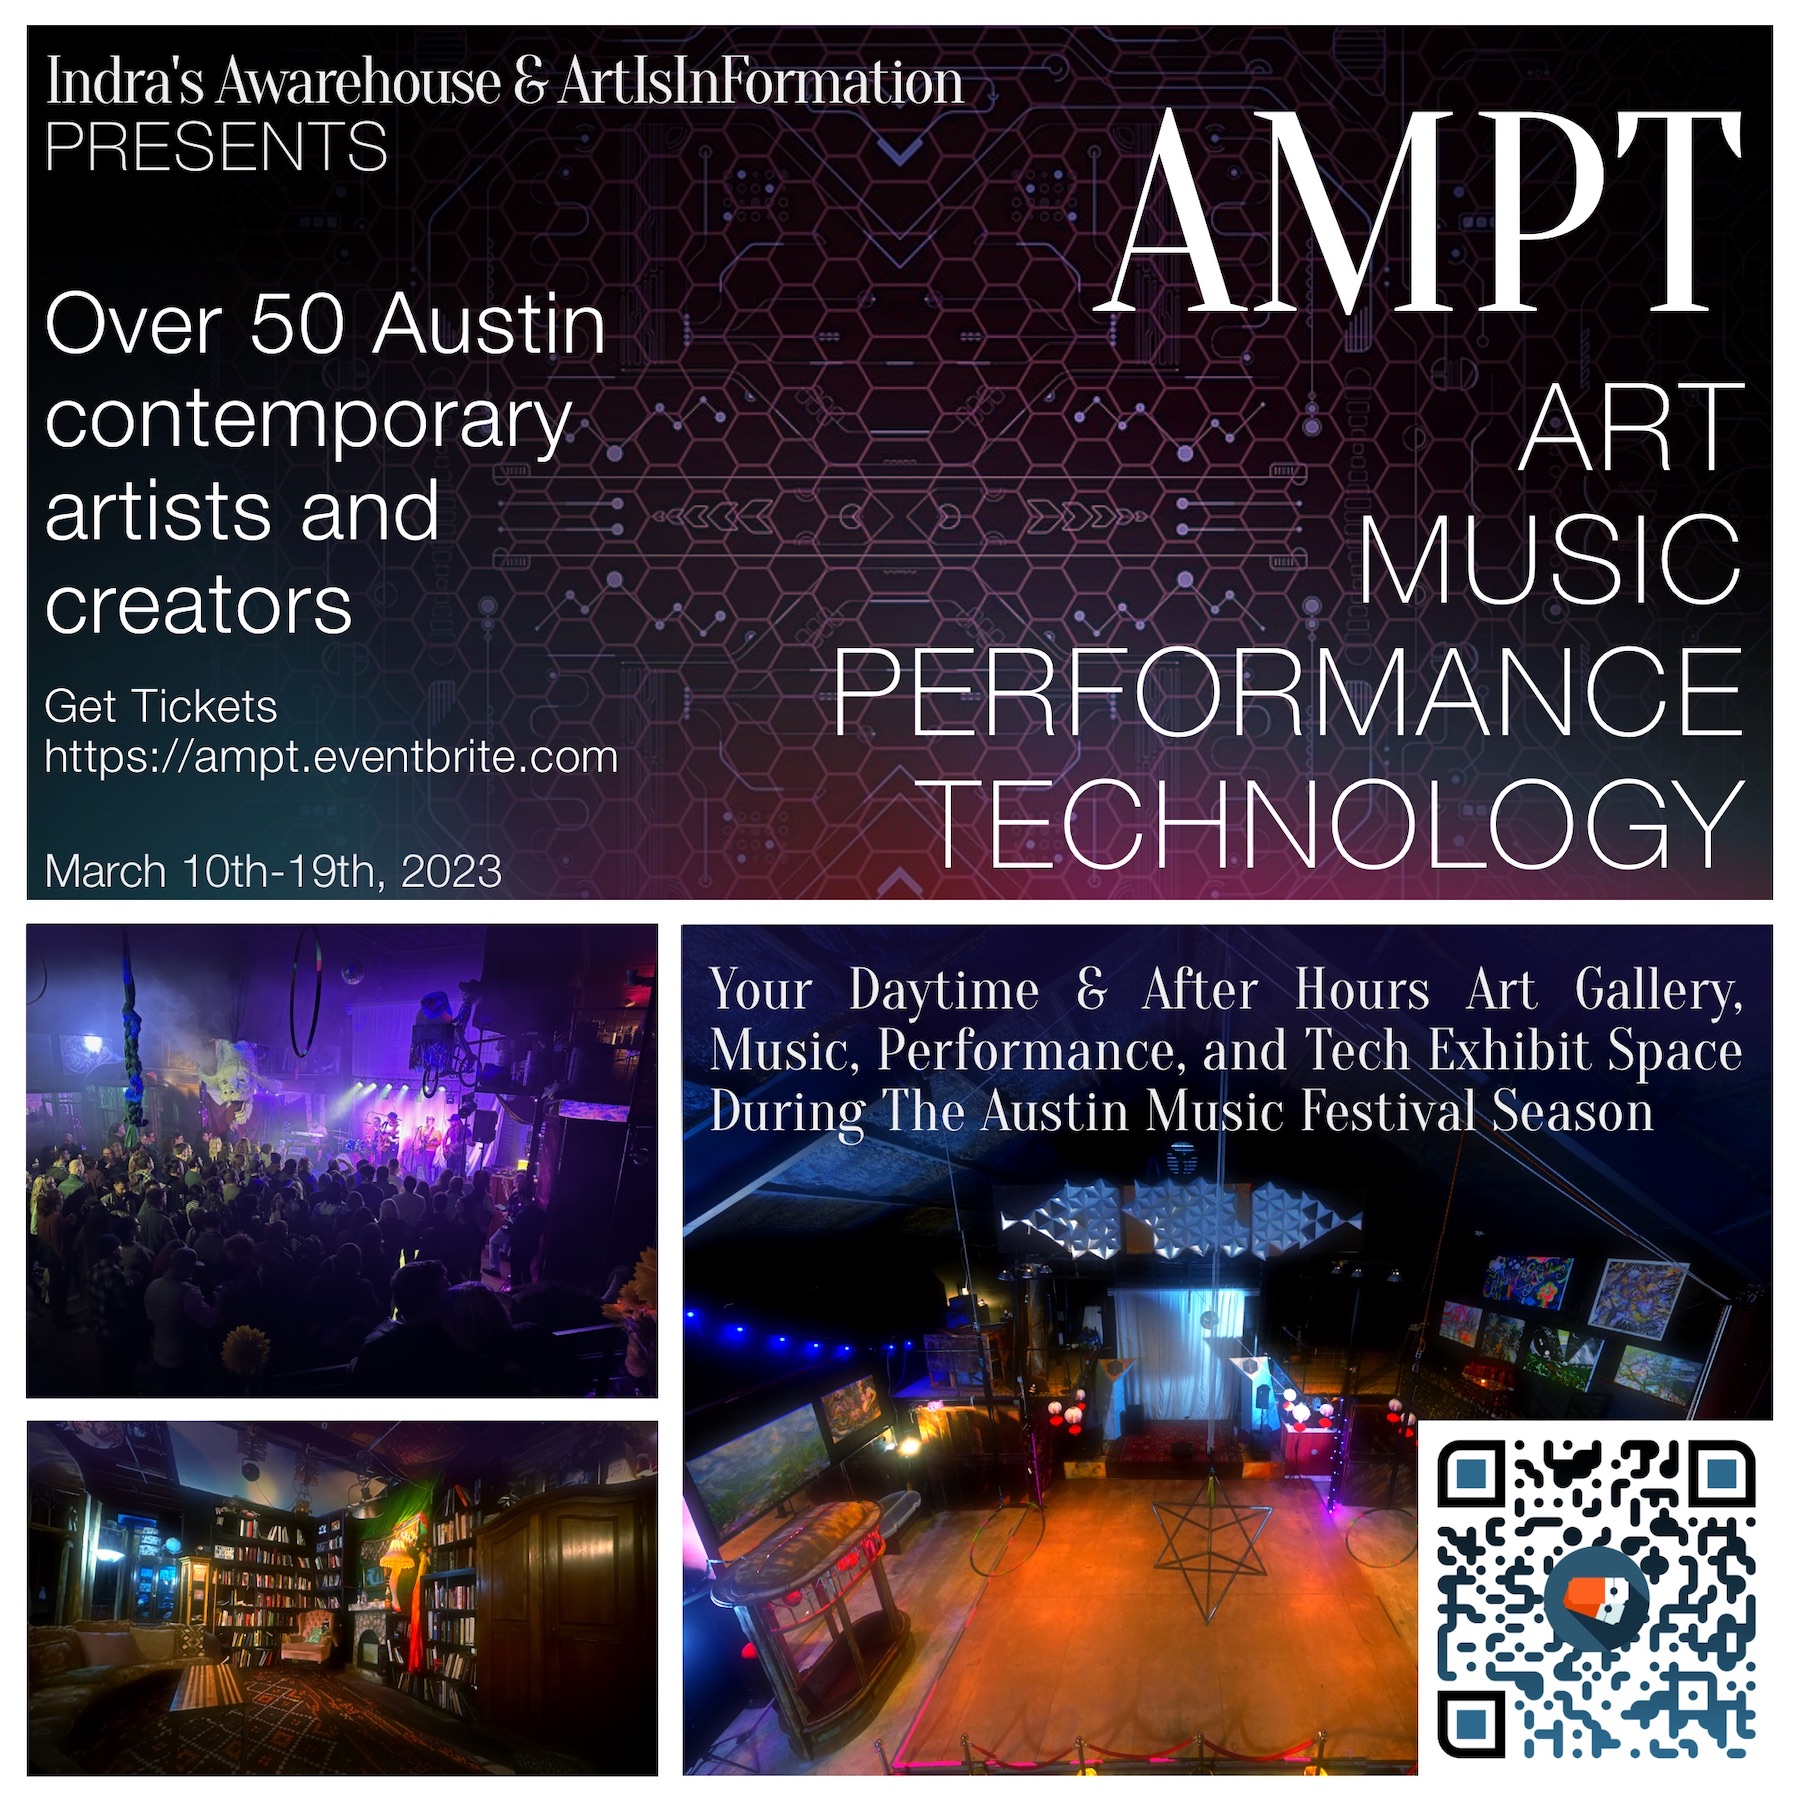 AMPT at Indra’s – Art Music Performance Technology